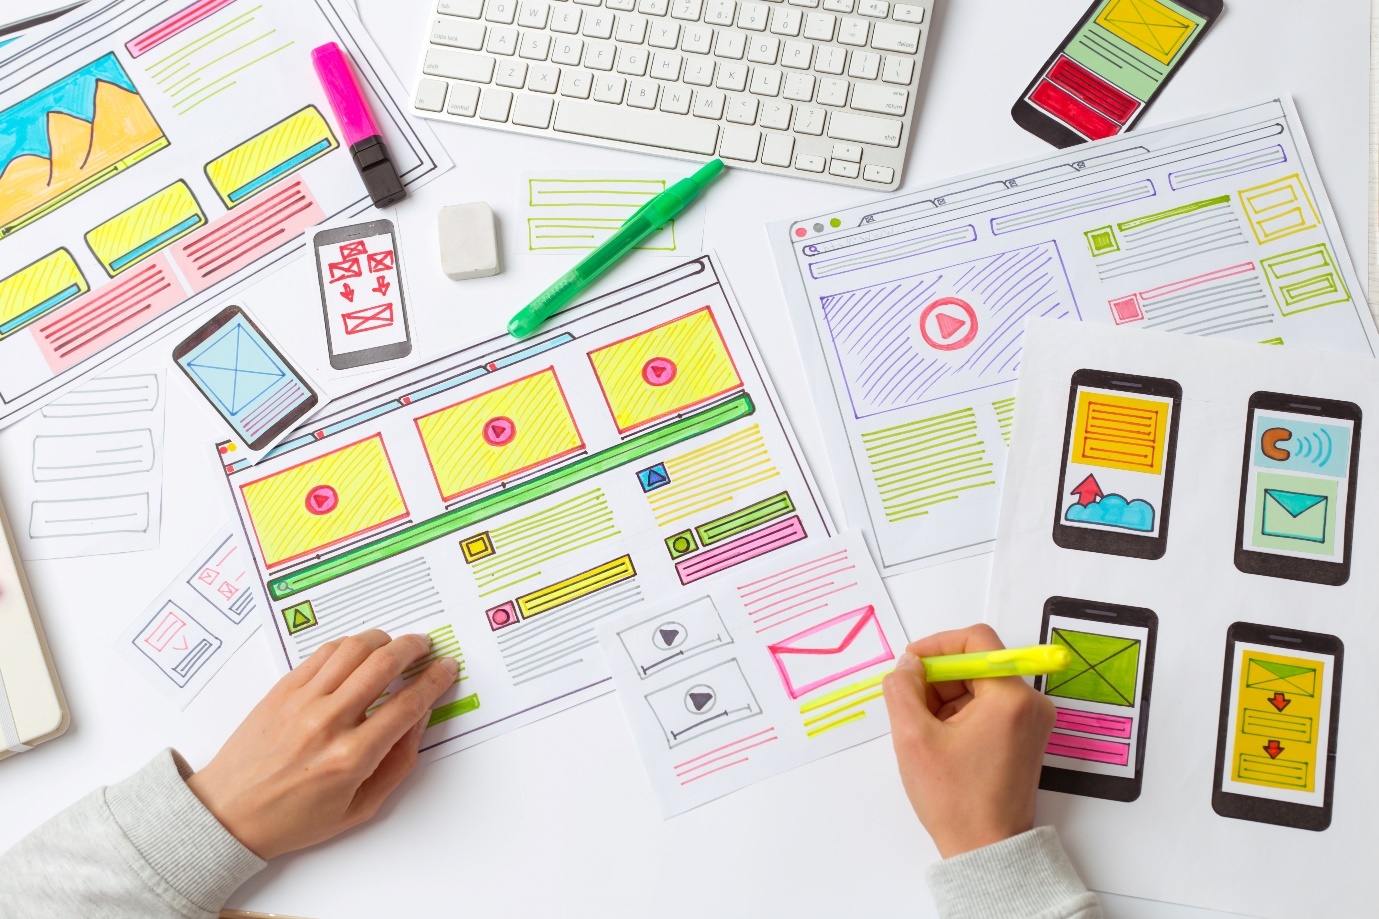 Web Design 101: A How-to Guide For Planning and Implementing The Best UX and UI | 2023